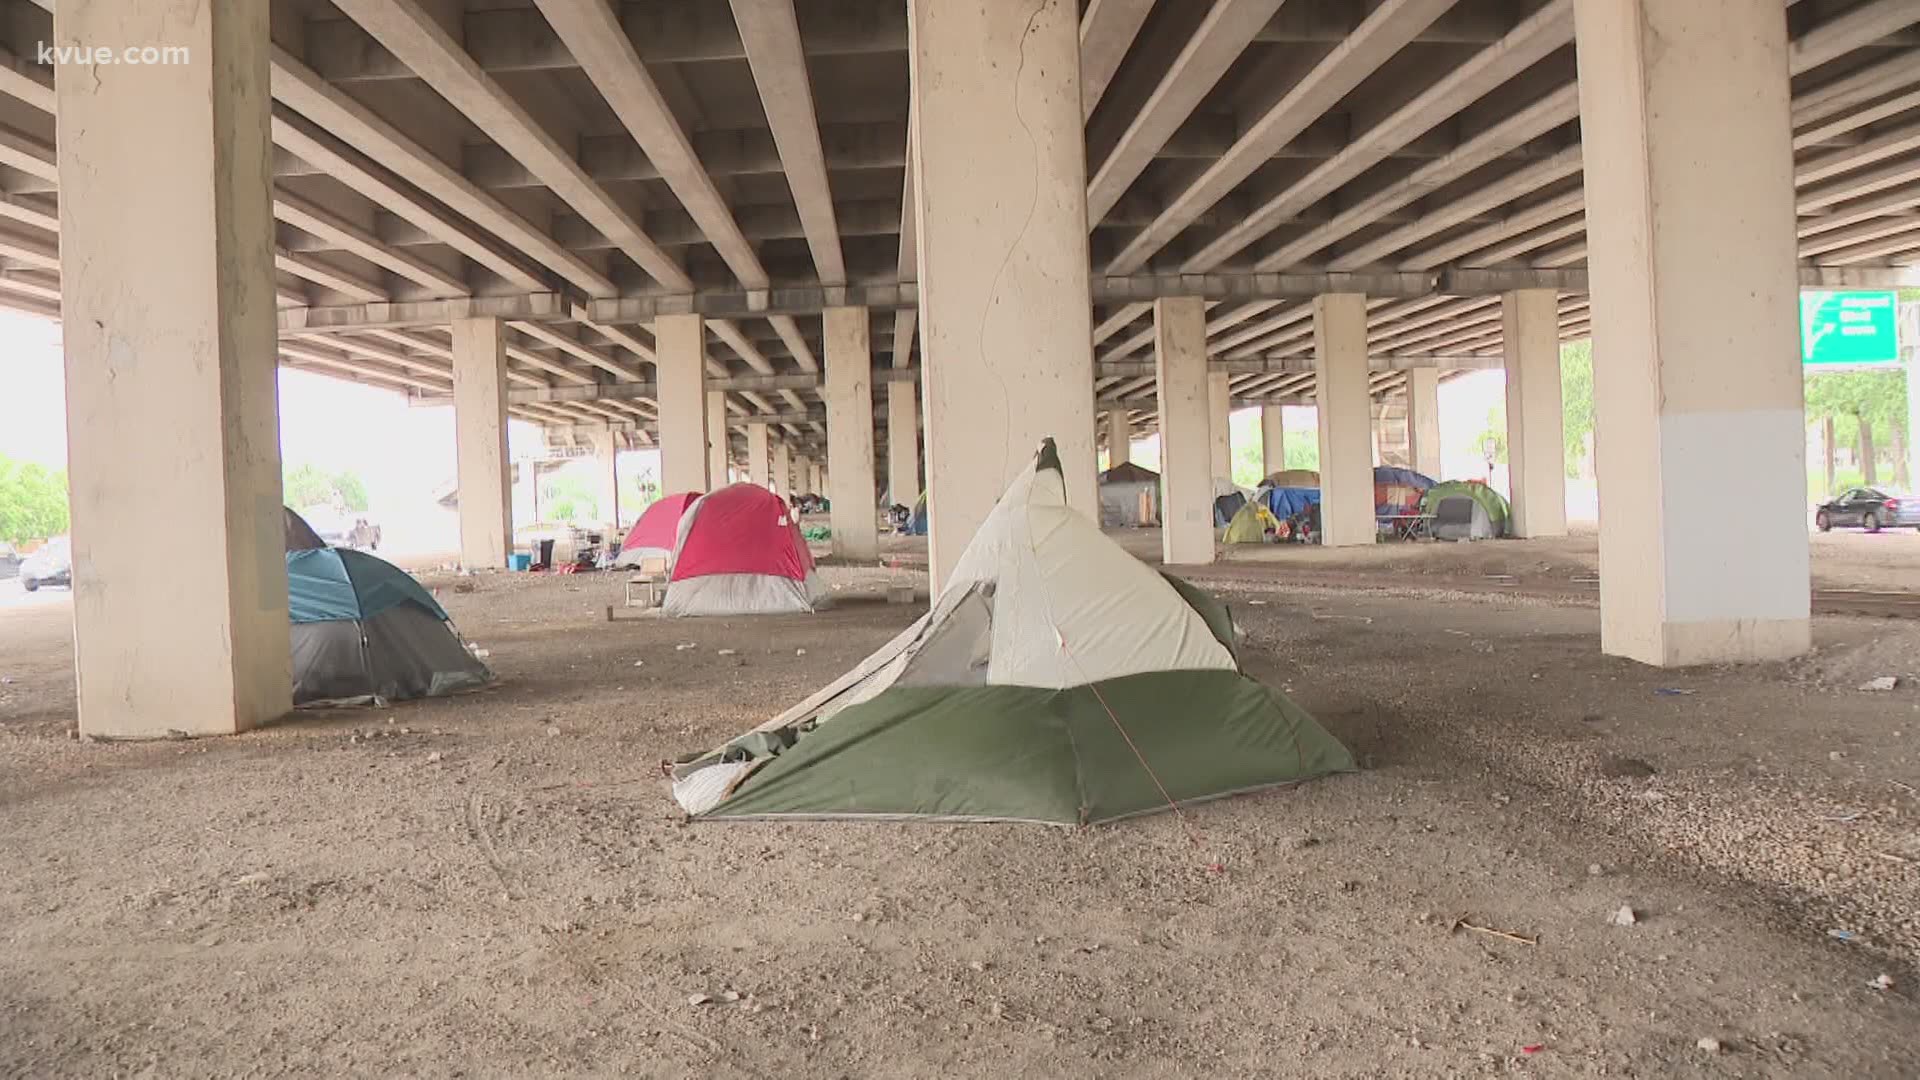 For the first time, we're seeing dozens of locations the City of Austin is considering to designated as homeless campsites.